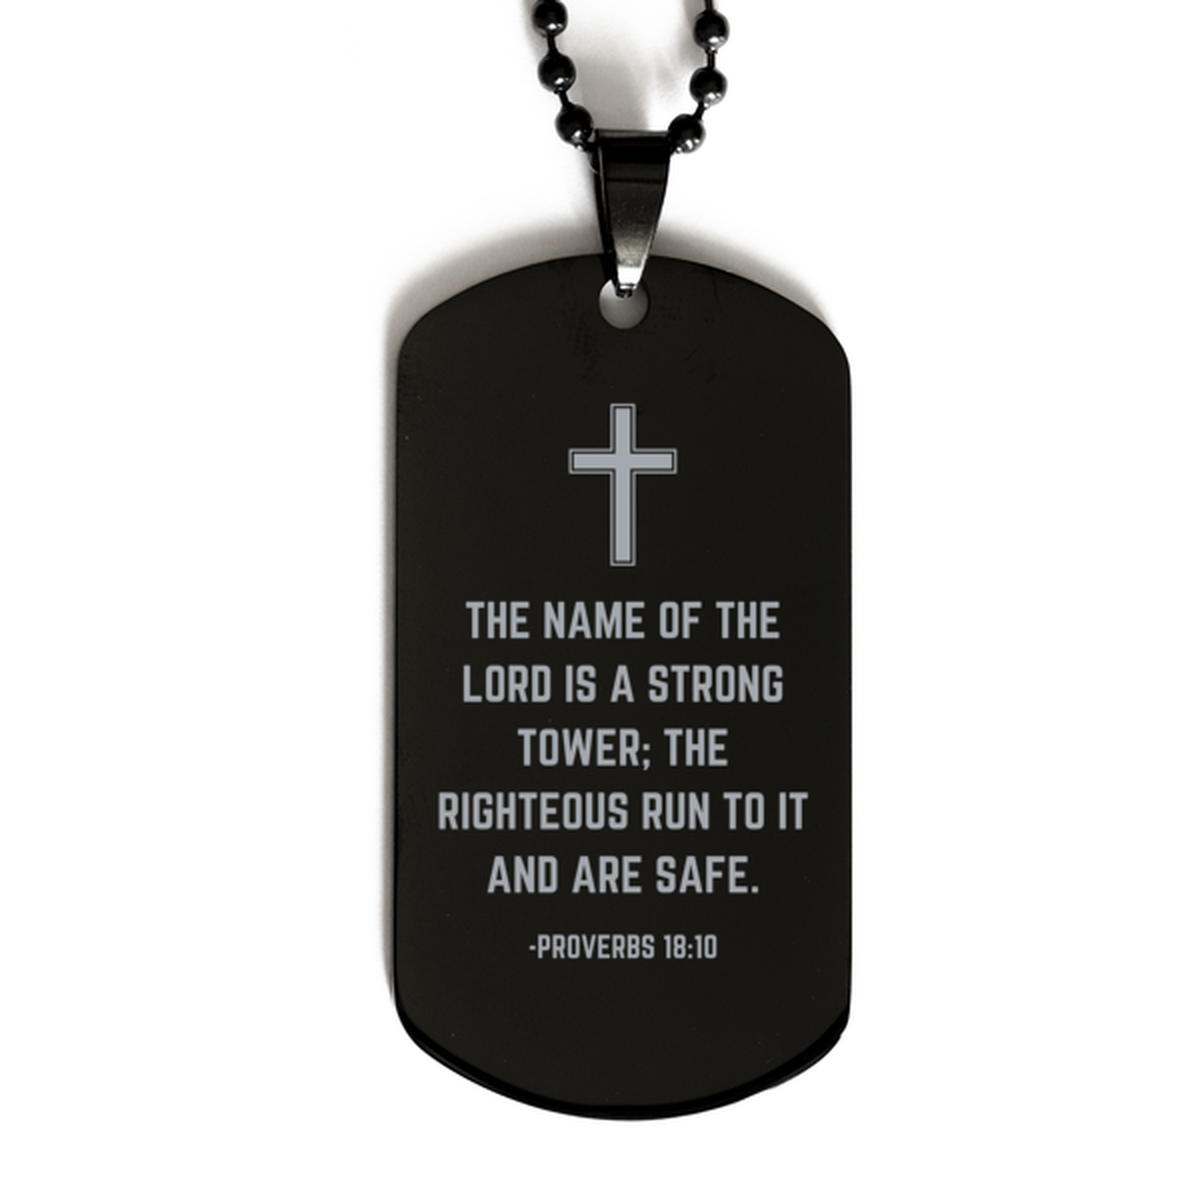 Baptism Gifts For Teenage Boys Girls, Christian Bible Verse Black Dog Tag, The name of the Lord is a strong, Confirmation Gifts, Bible Verse Necklace for Son, Godson, Grandson, Nephew